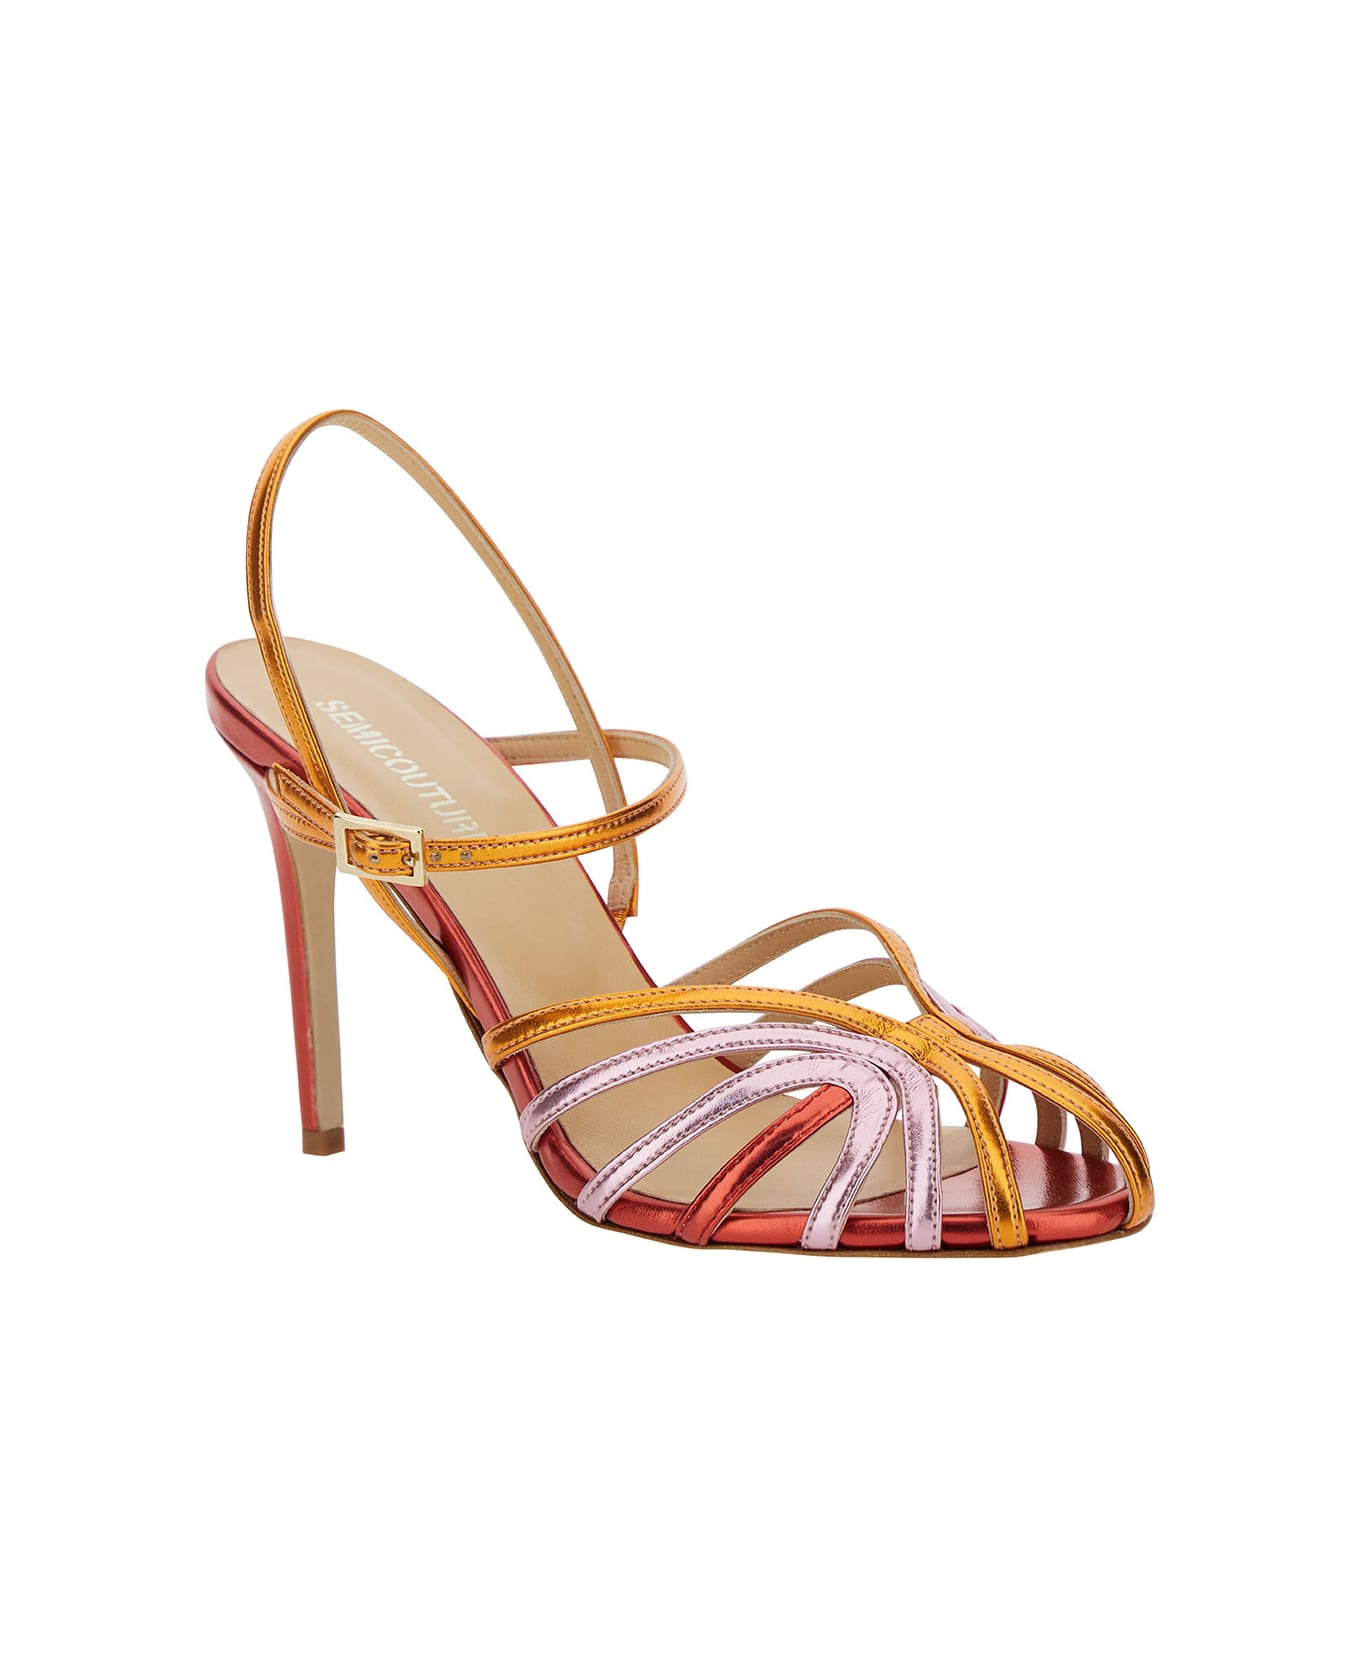 SEMICOUTURE Tricolor Mirrored Sandal With Front Cage In Faux Leather Woman - Multicolor サンダル